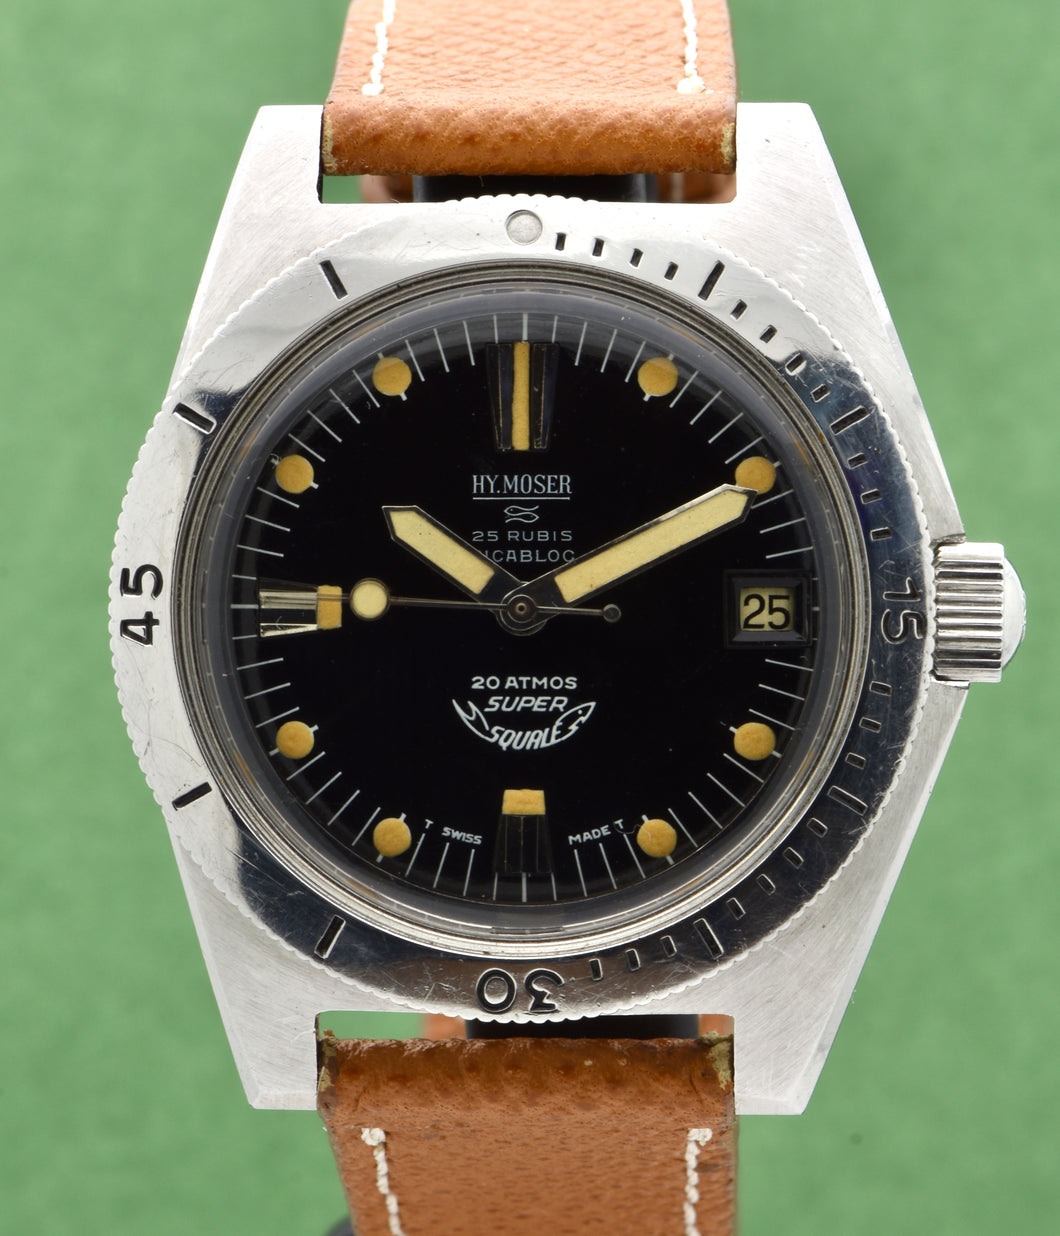 Squale Supermatic 200 for HY. Moser